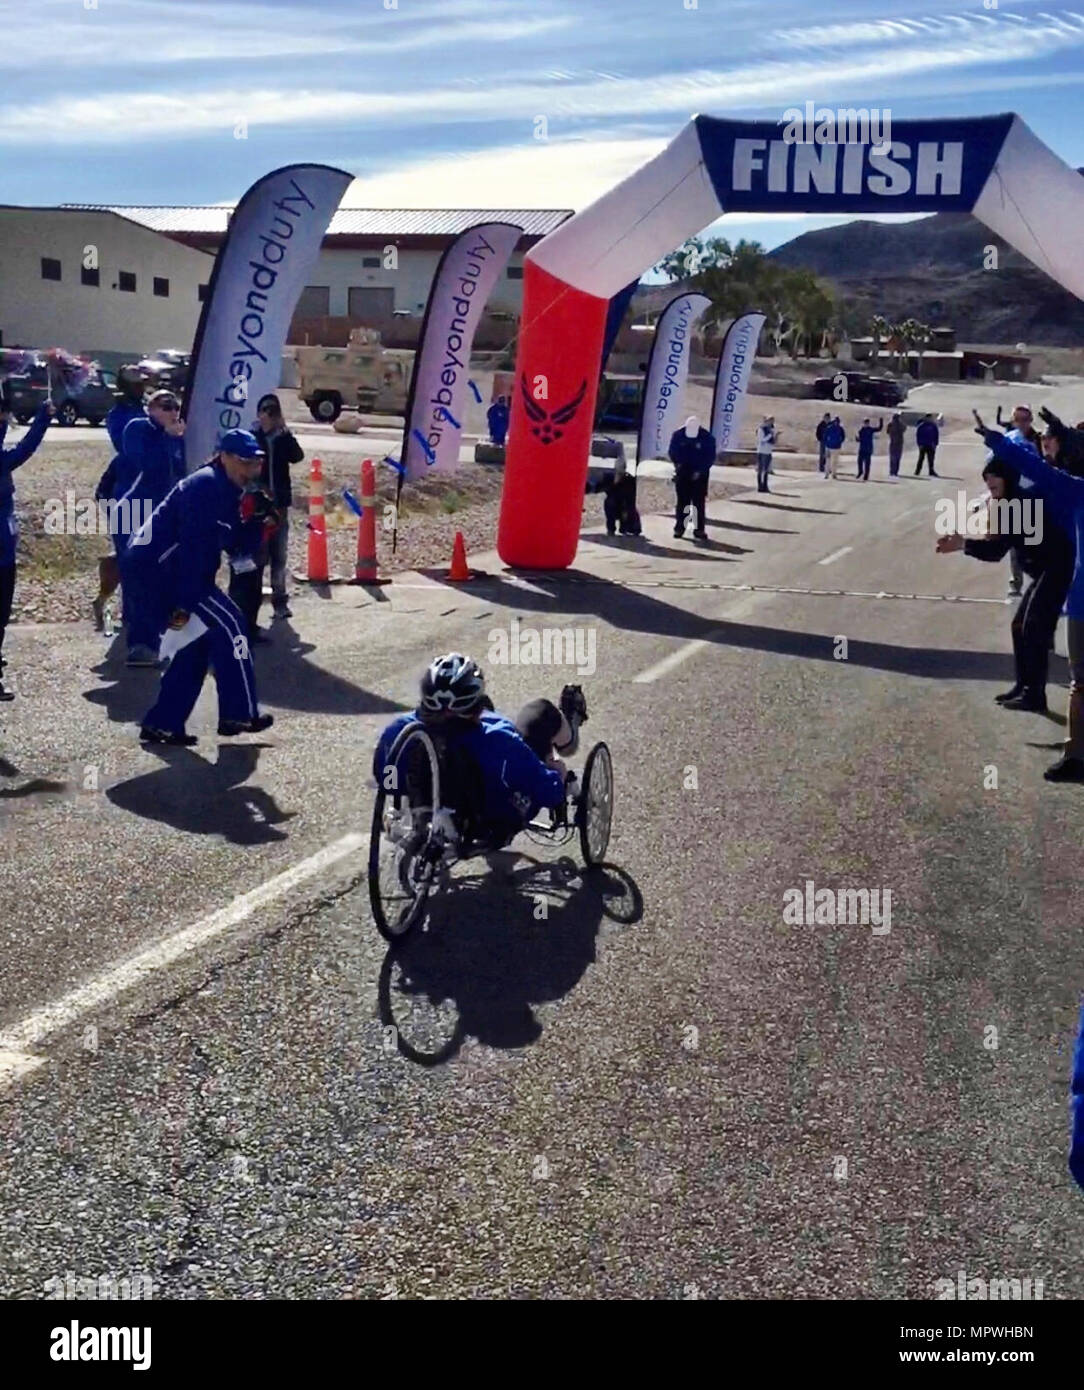 Lt Col Jackie Burns, 552d Air Control Group, 552d Air Control Wing, prepares to cross the finish line on her way to earning a Silver Medal in Cycling on a recumbent bike. This event took place at the Wounded Warrior Trials held February 17, 2017, at Nellis Air Force Base, Nevada.  Burns was selected to the primary Air Force team which will compete at the Warrior Games June 30 - July 8, 2017 in Chicago.  (Air Force Stock Photo